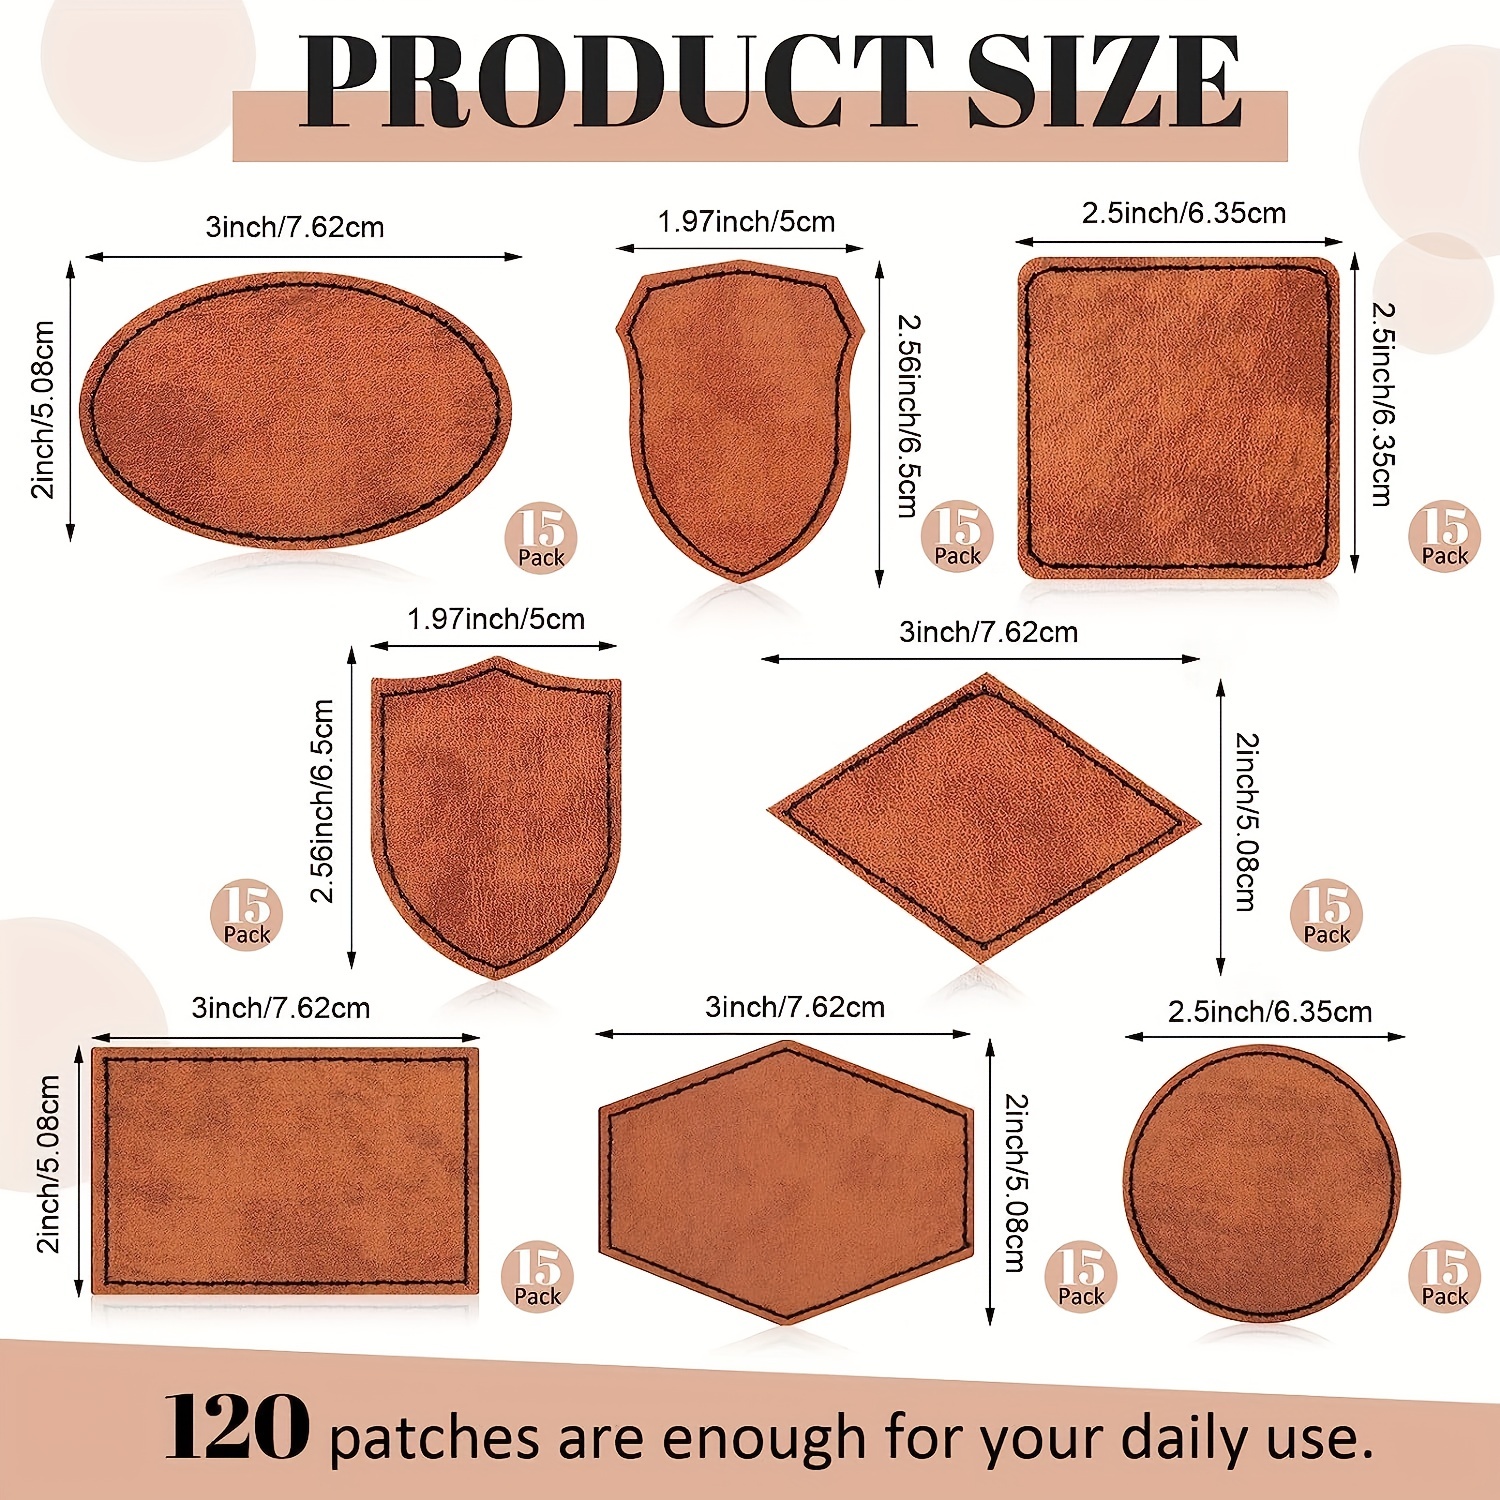 Leather Patches for Hats (10 Pack) Leather Patches for Laser Engraving, Leather Adhesive Patch, Leatherette Patches, Leather Hat Patches for Laser